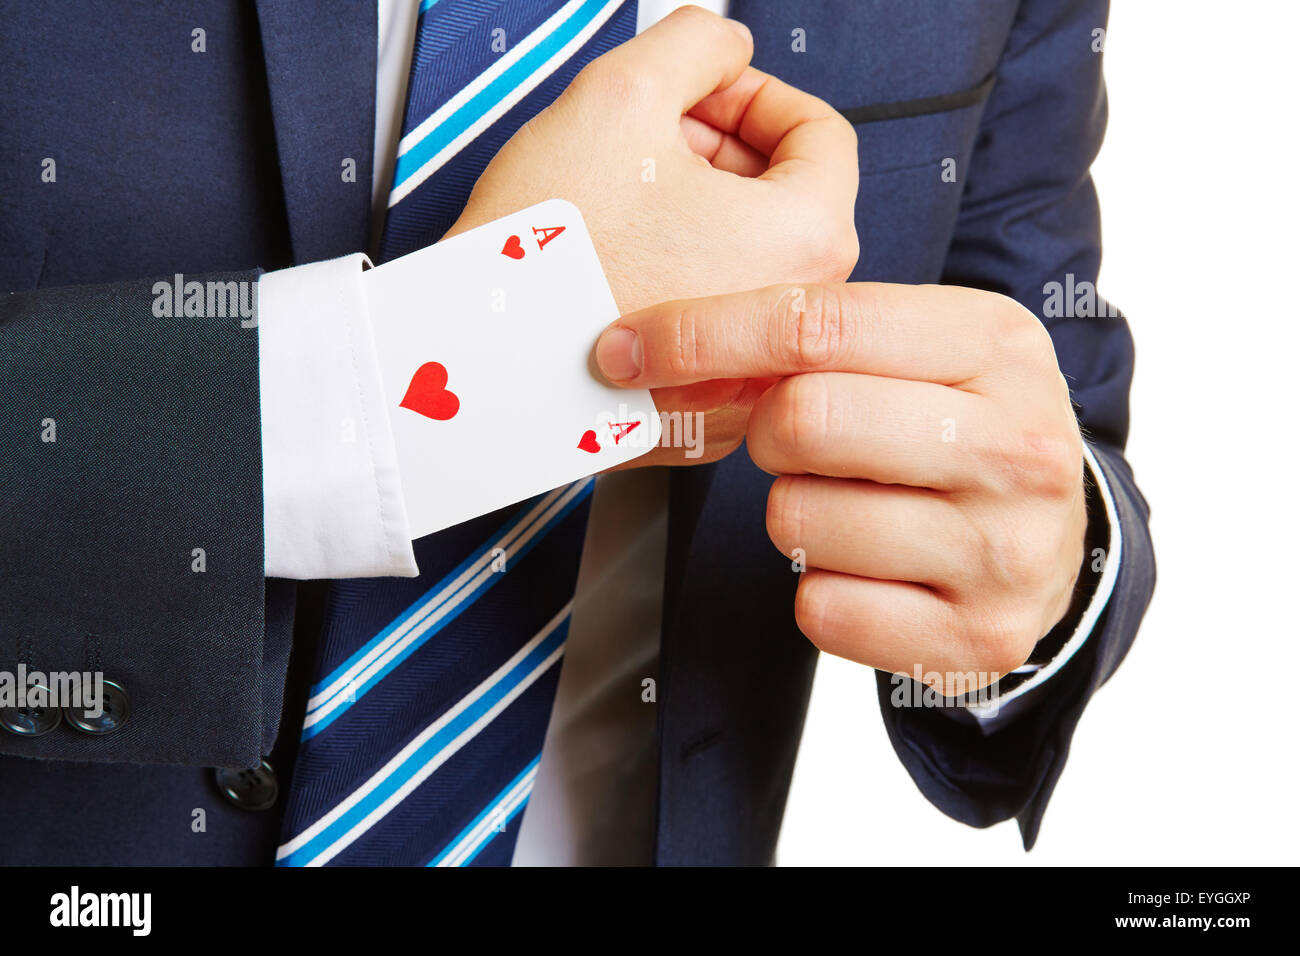 Successful business manager having an ace up his sleeve Stock Photo